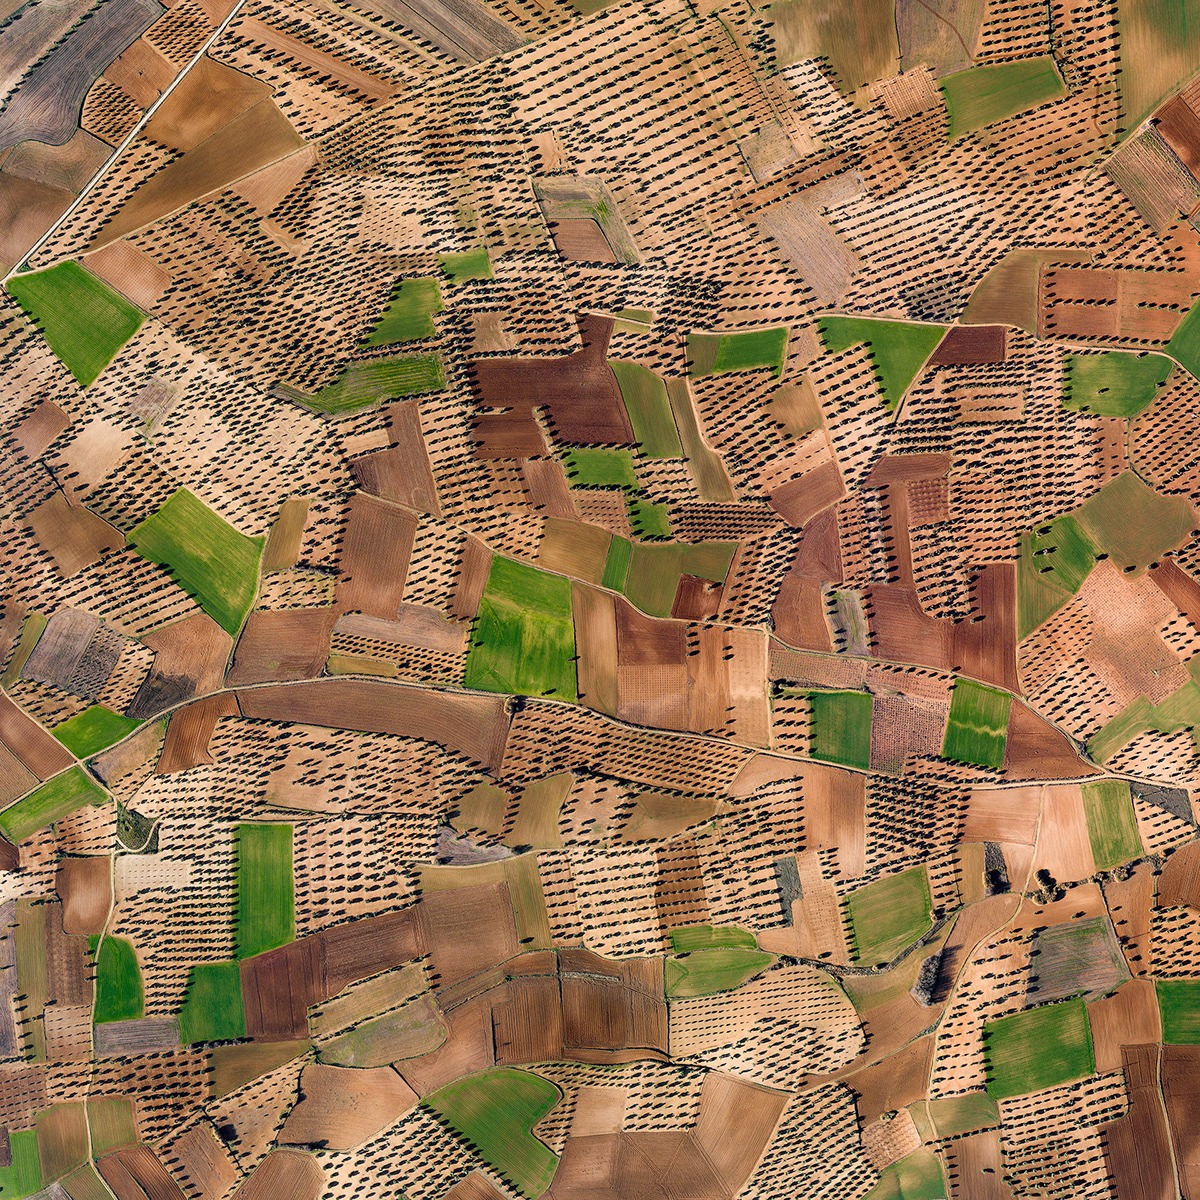 Valdecarábanos - Patterns of alternating olive and wheat fields south of Madrid, in the catchment area of the Cedrone River, where these two crops can withstand extreme drought and high summer temperatures. Huerta de Valdecarábanos, Toledo, Spain. 12/31/2018
Visible width: 1400 m